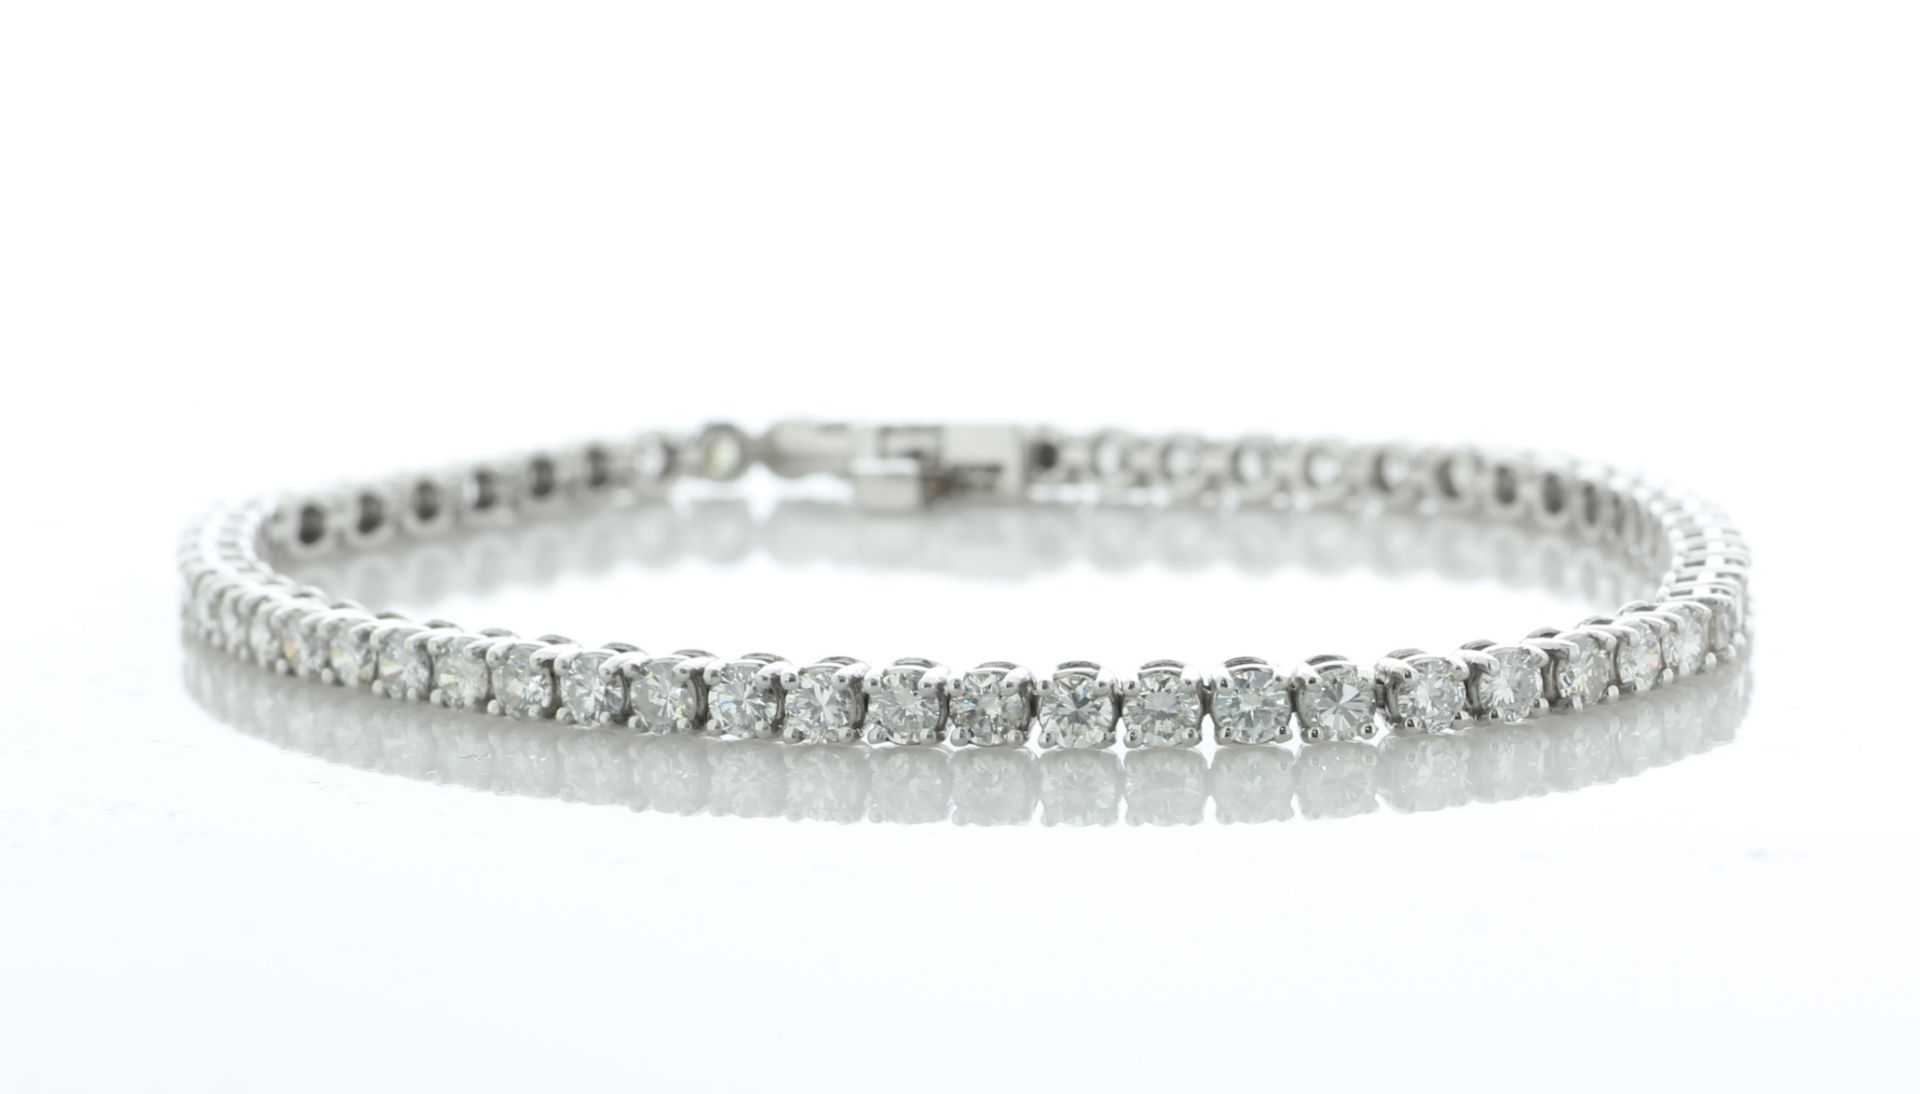 18ct White Gold Tennis Diamond Bracelet 4.66 Carats - Valued By IDI £16,900.00 - Fifty eight round